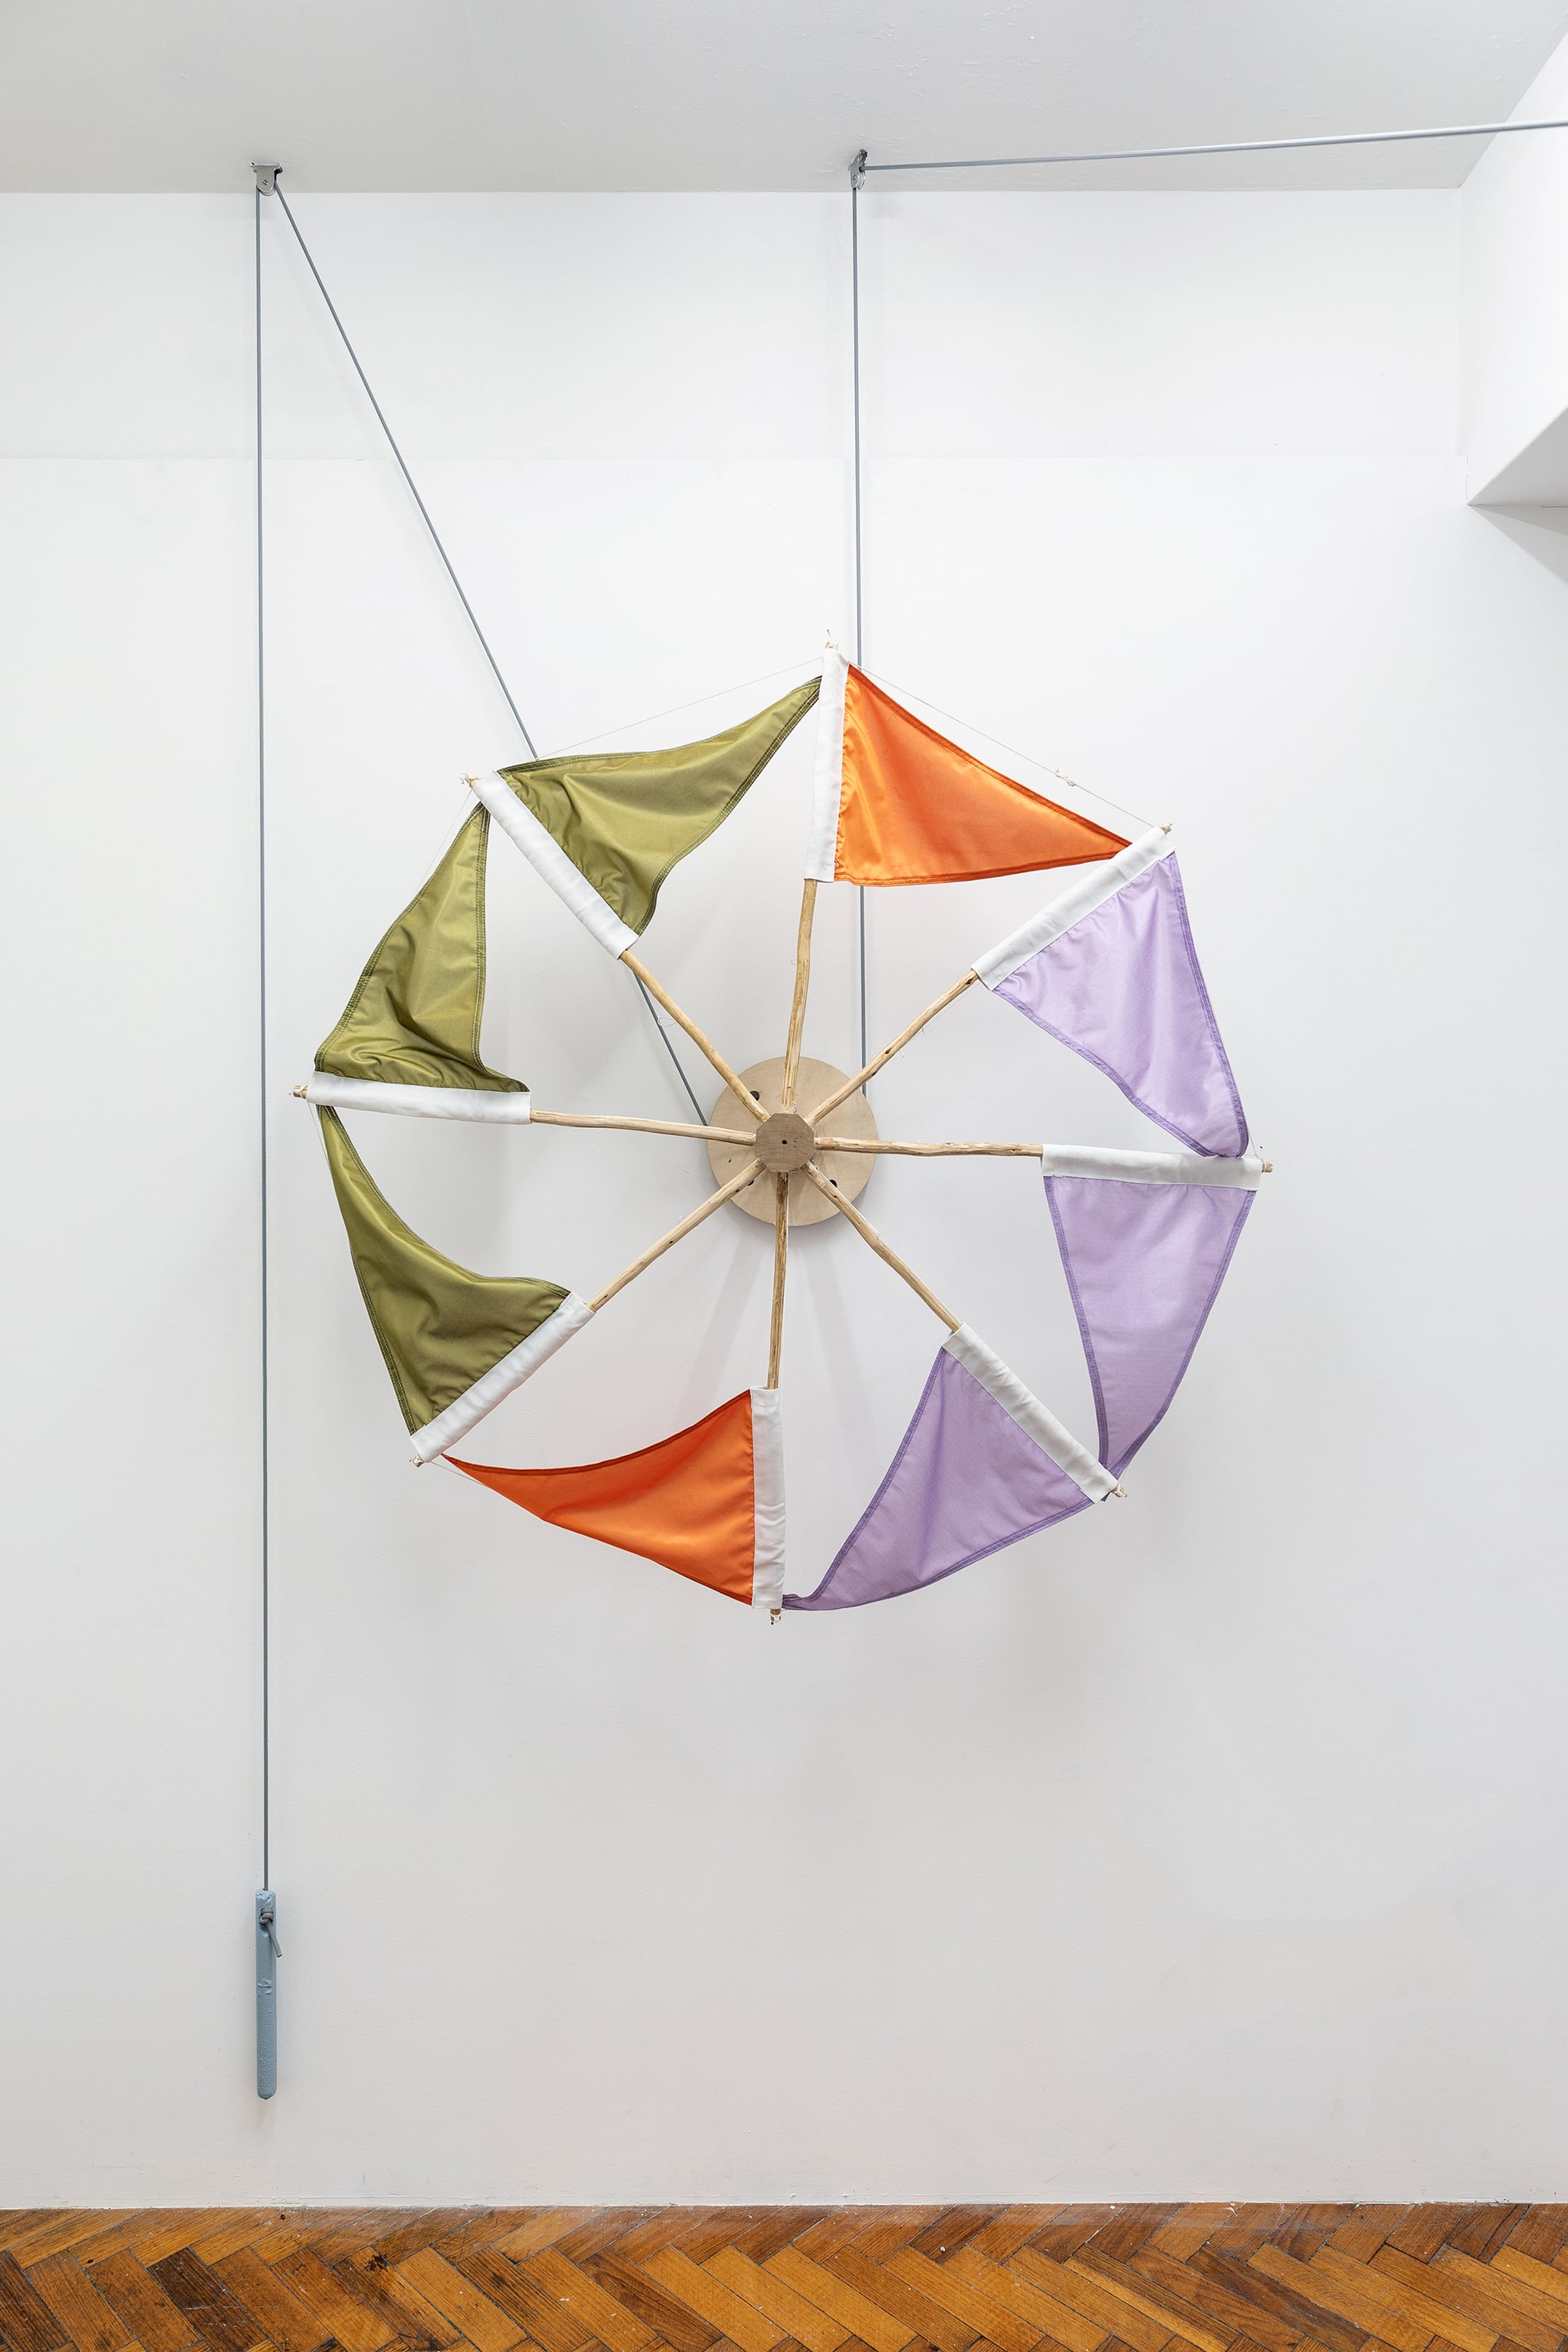 Image 02: Nadine Christensen, Signal Decoy (2018), synthetic and cotton printed fabric, sapling, plywood, cast iron, polycotton rope, aluminium pulley mechanism
Dimensions variable. Courtesy the artist and Sarah Scout Presents, Melbourne. Photography: Andrew Curtis.